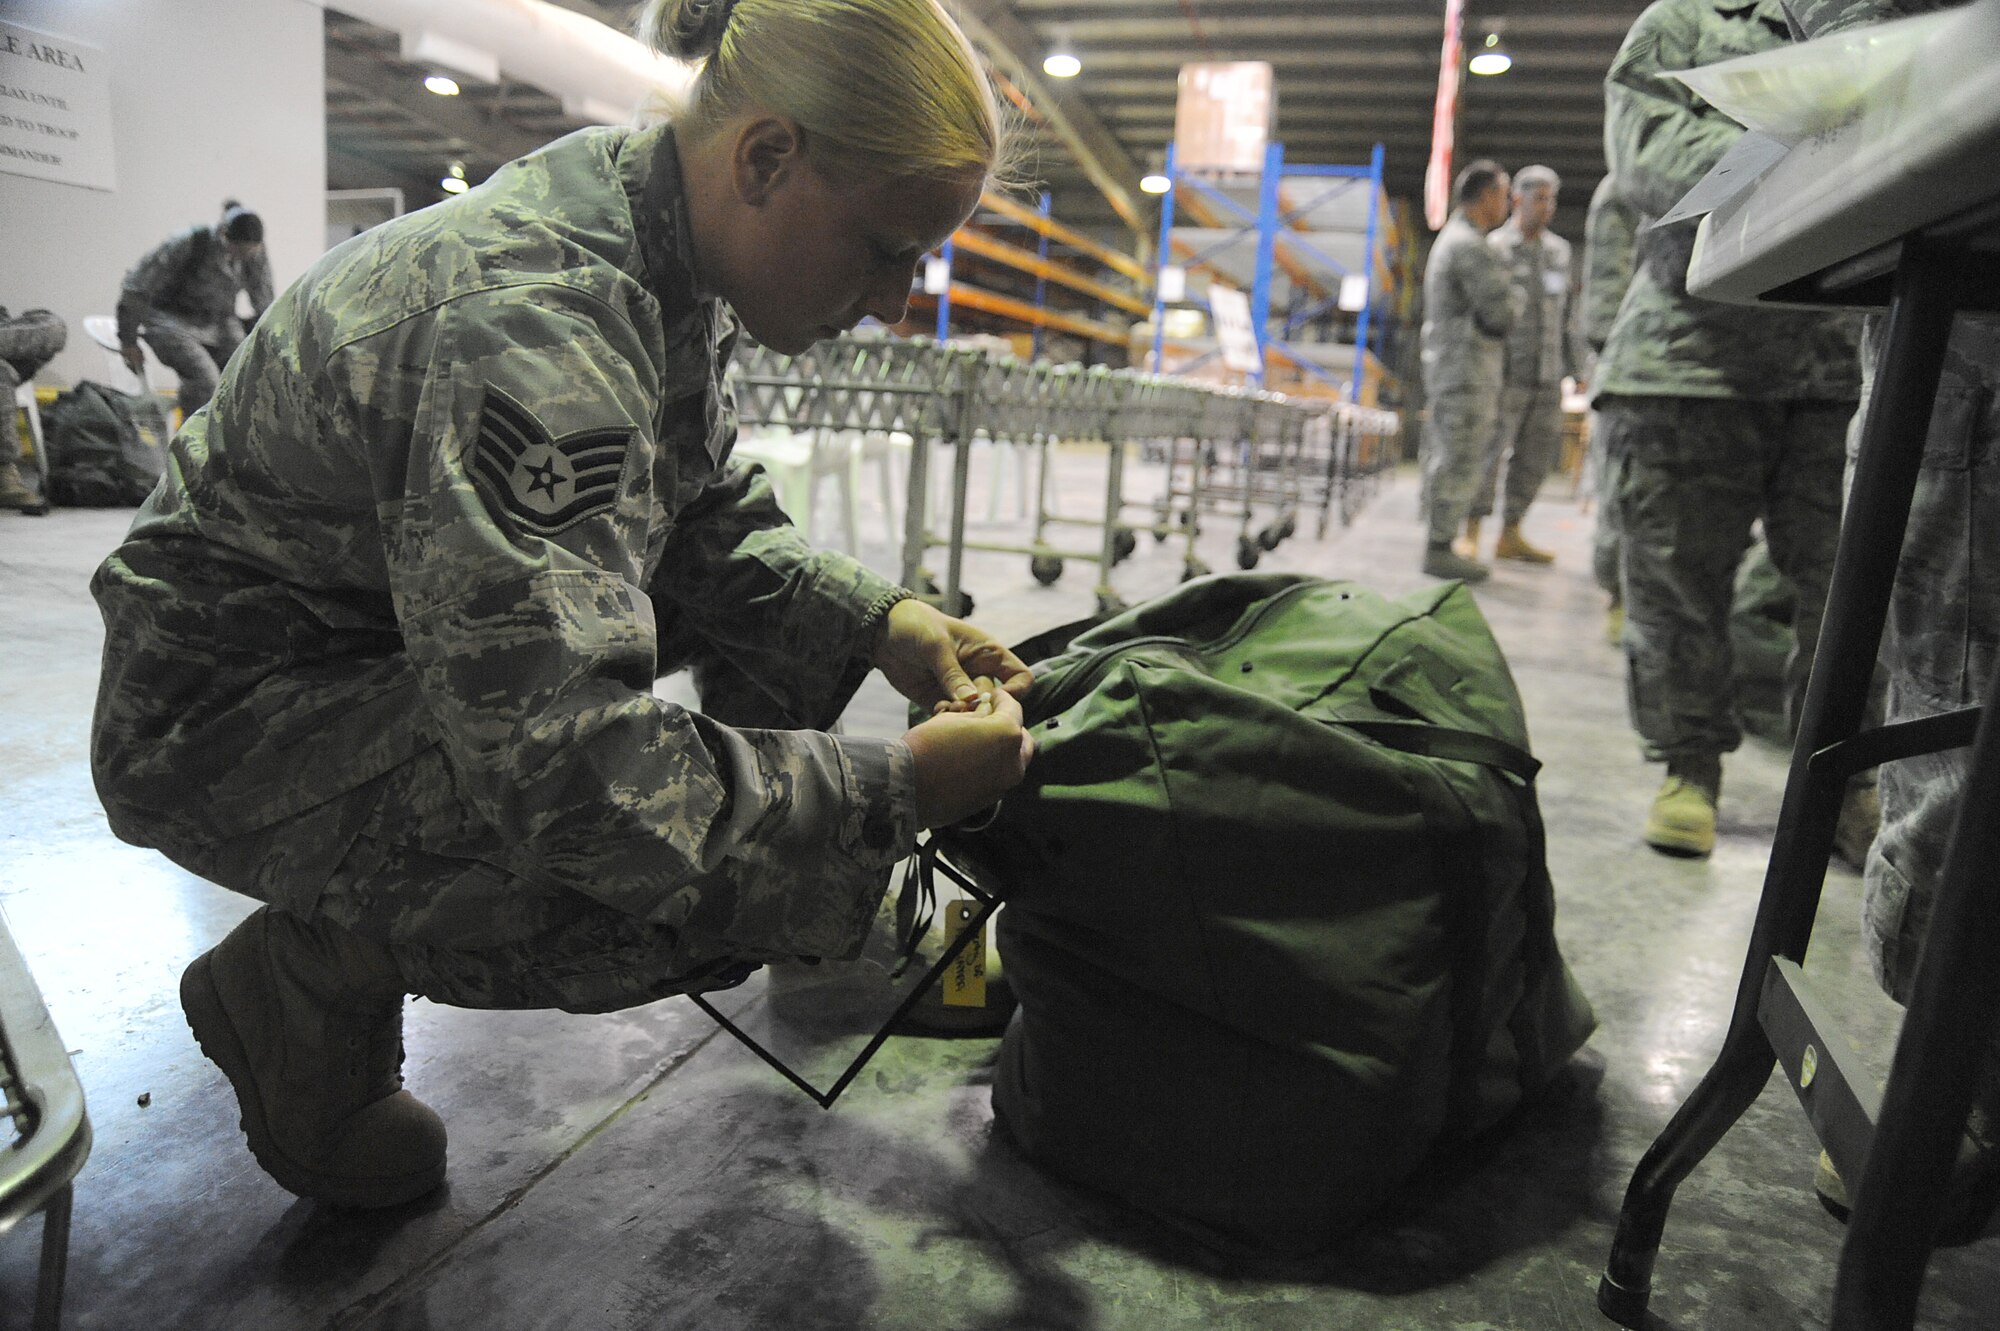 Staff Sgt. Angela Dawson, 380th Expeditionary Logistics Readiness Squadron, zip-ties a plastic sleeve to a C-bag during a readiness exercise, April 21 at undisclosed location in Southwest Asia. The plastic sleeve will hold a form 1297 hand receipt with the inventory of the C-bag listed. The 380th ELRS ran the exercise to test the timeliness and capability for redeployment of Airmen. Sergeant Dawson is deployed from Eglin AFB, Fla. and hails from Tallahassee, Fla. (U.S. Air Force photo by Senior Airman Brian J. Ellis) (Released)